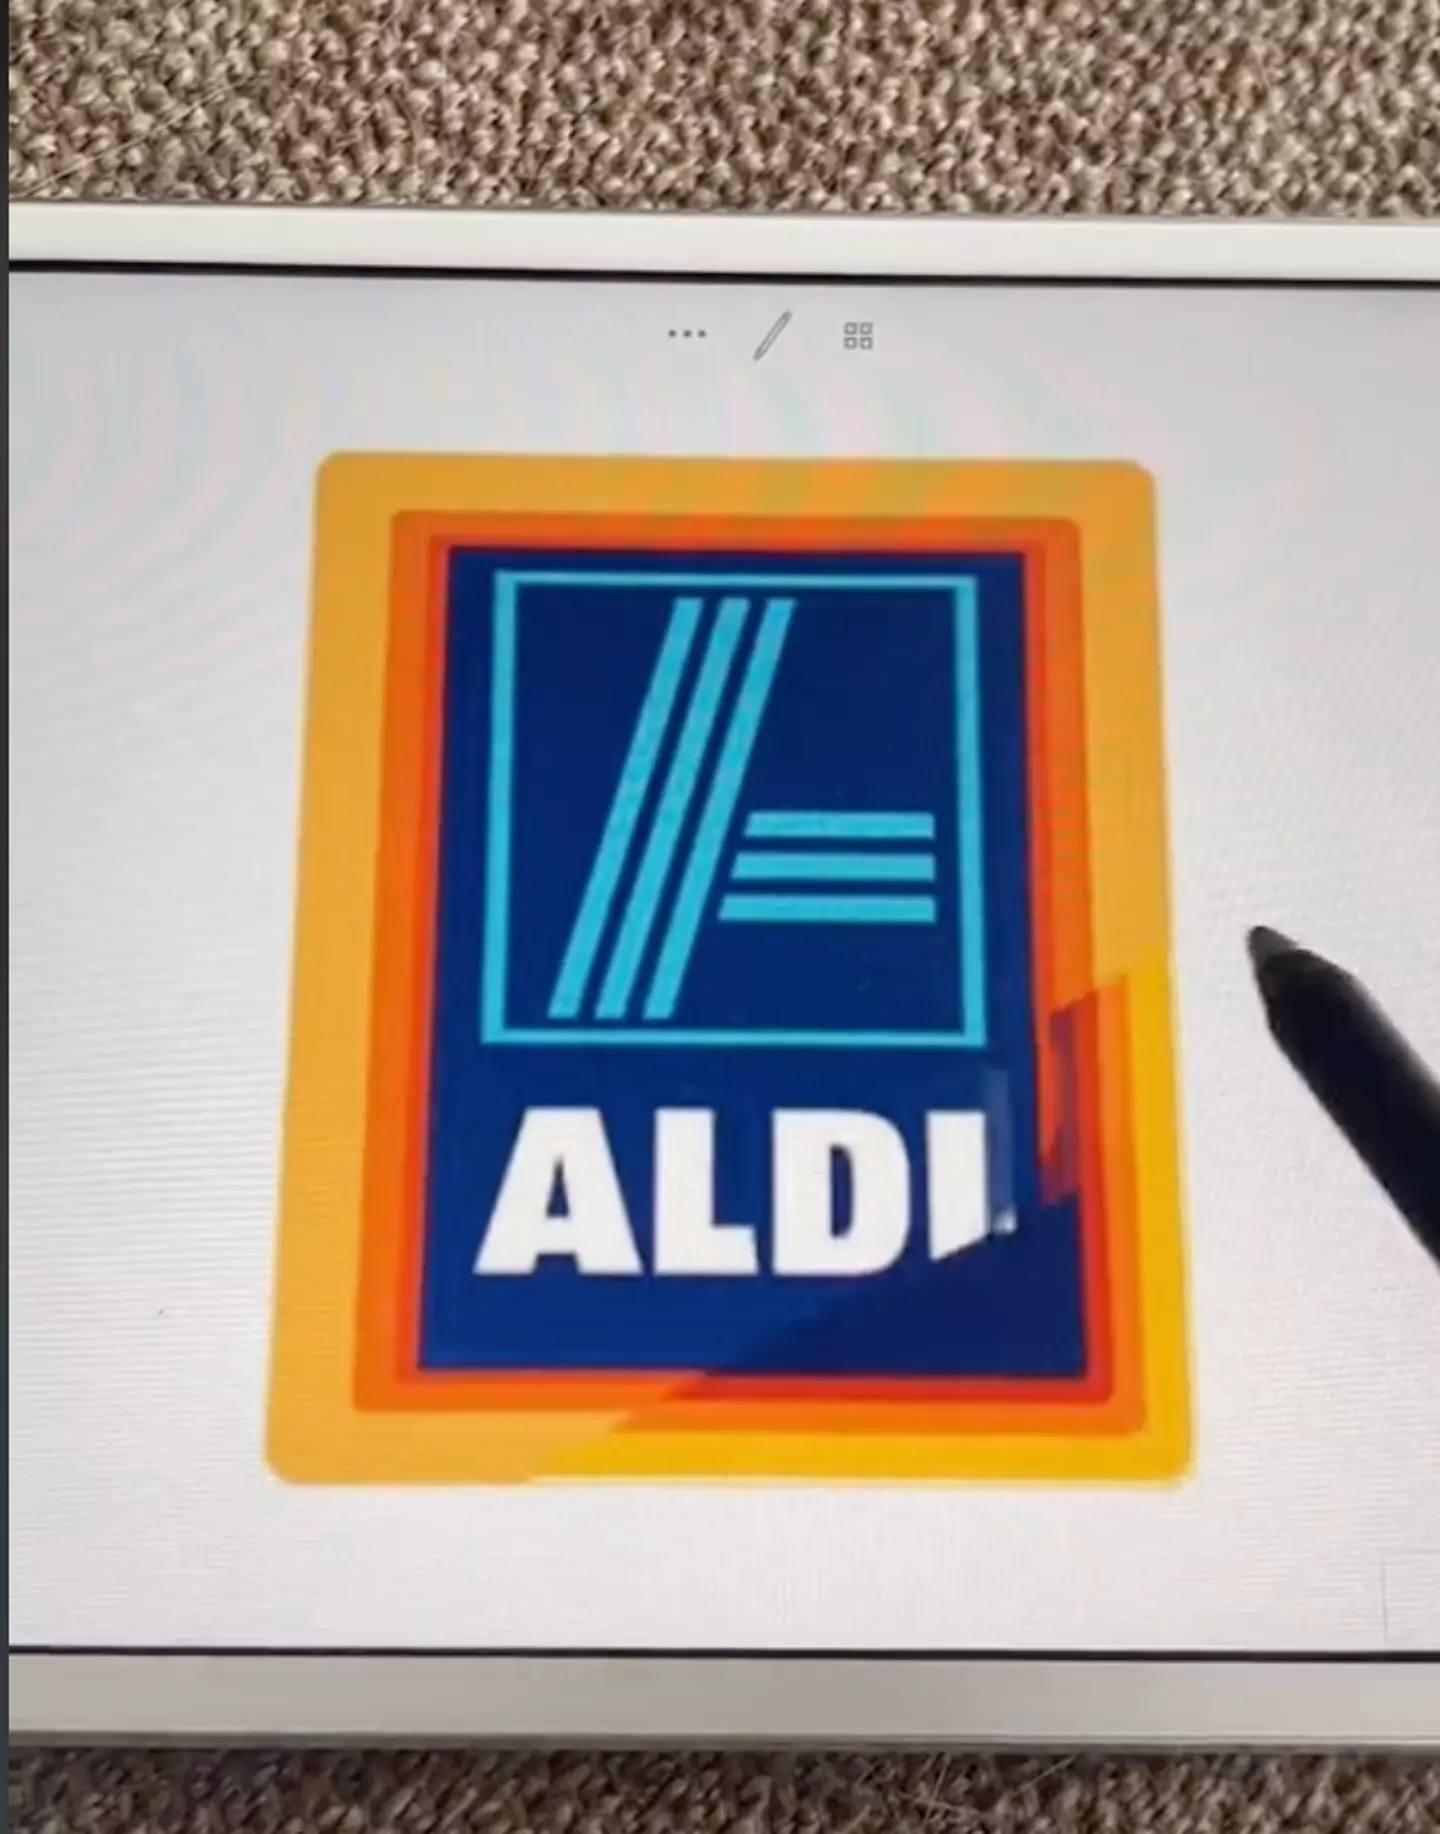 Some think the new Aldi logo looks older. (